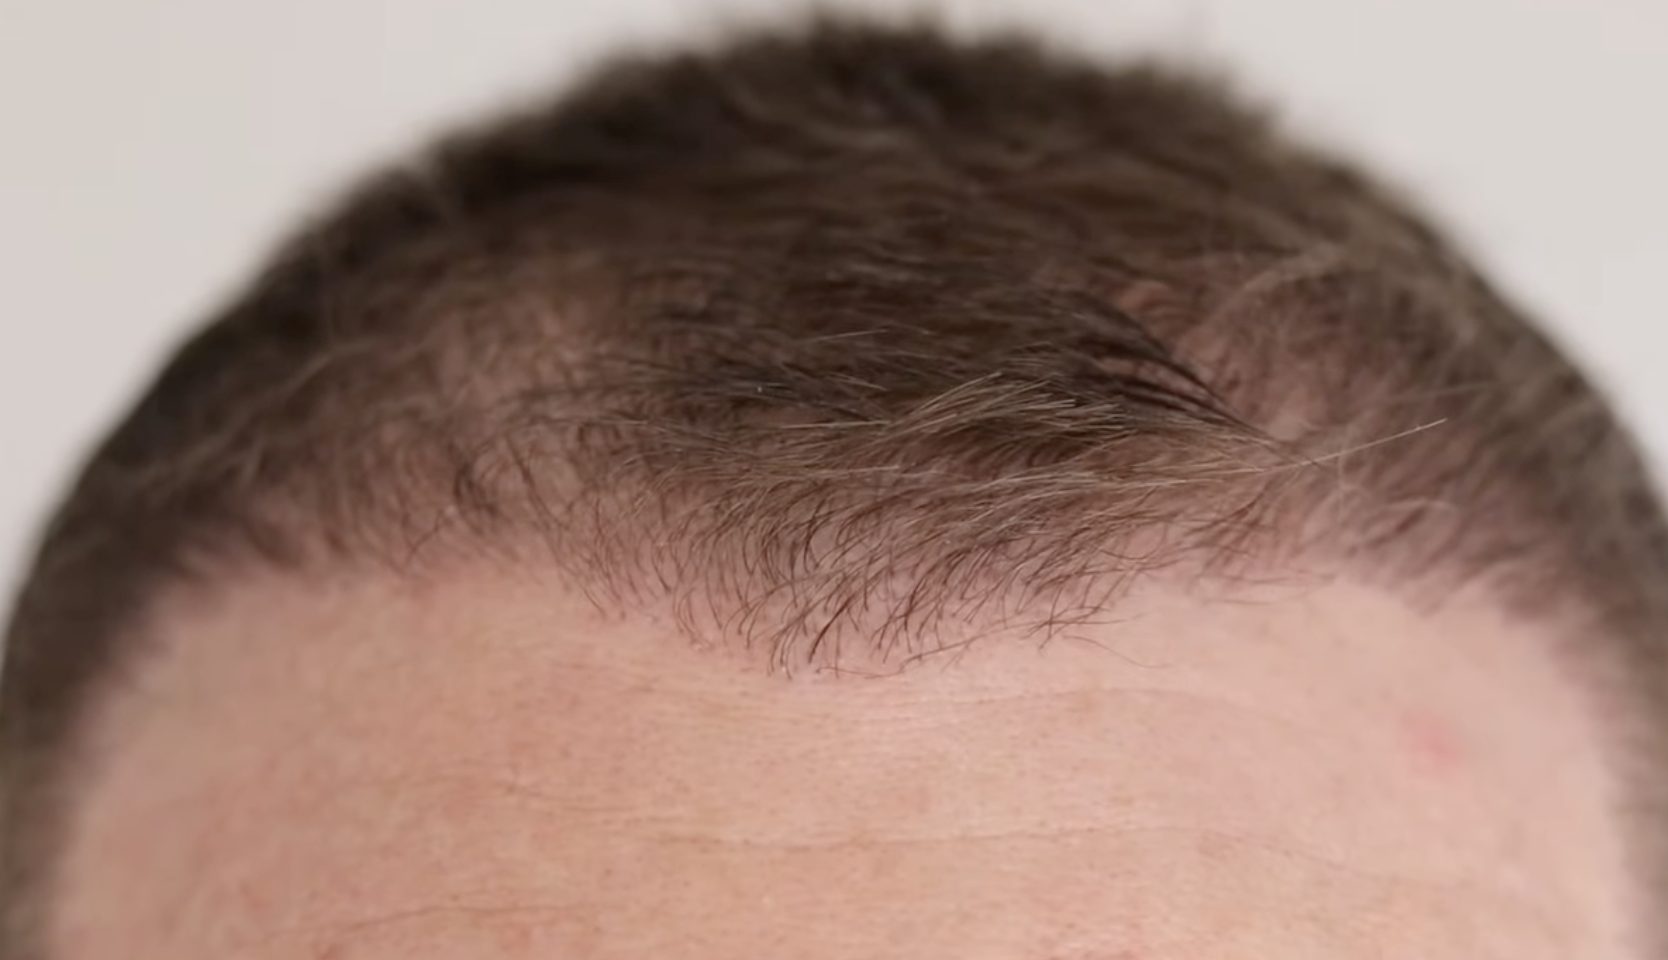 Hair Transplant After 4 Months: Photos, Results, Side Effects